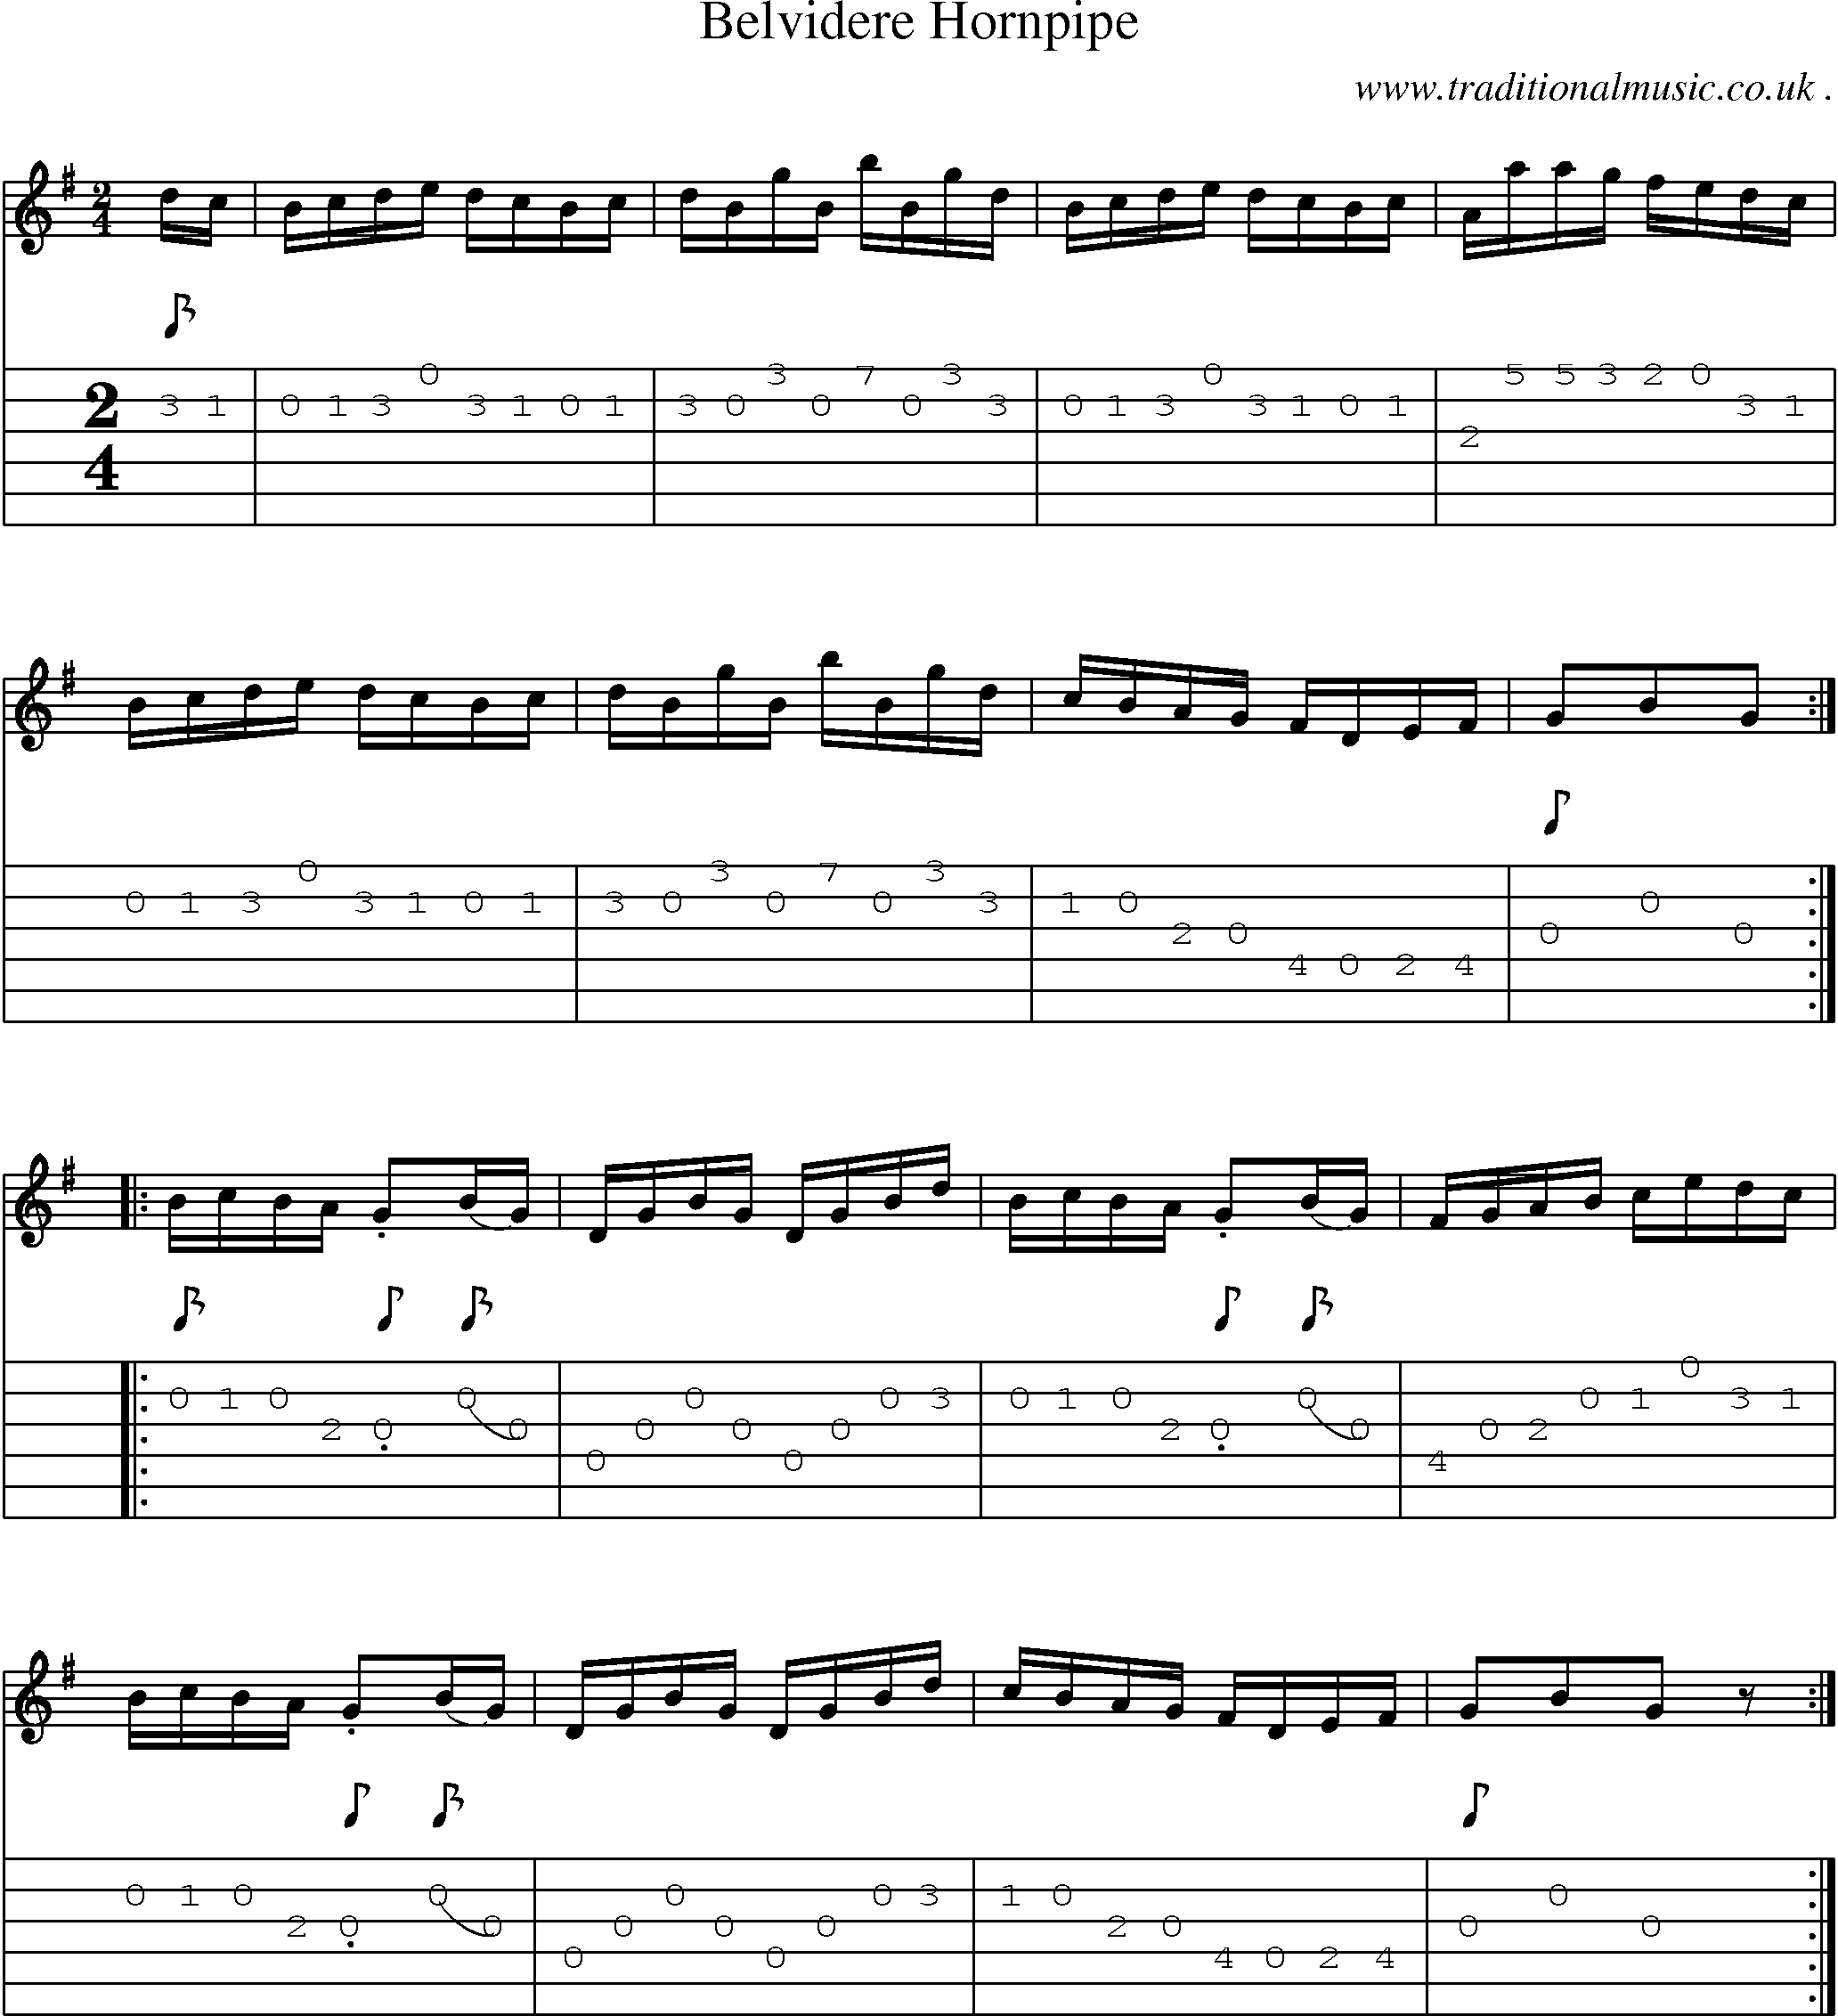 Sheet-Music and Guitar Tabs for Belvidere Hornpipe